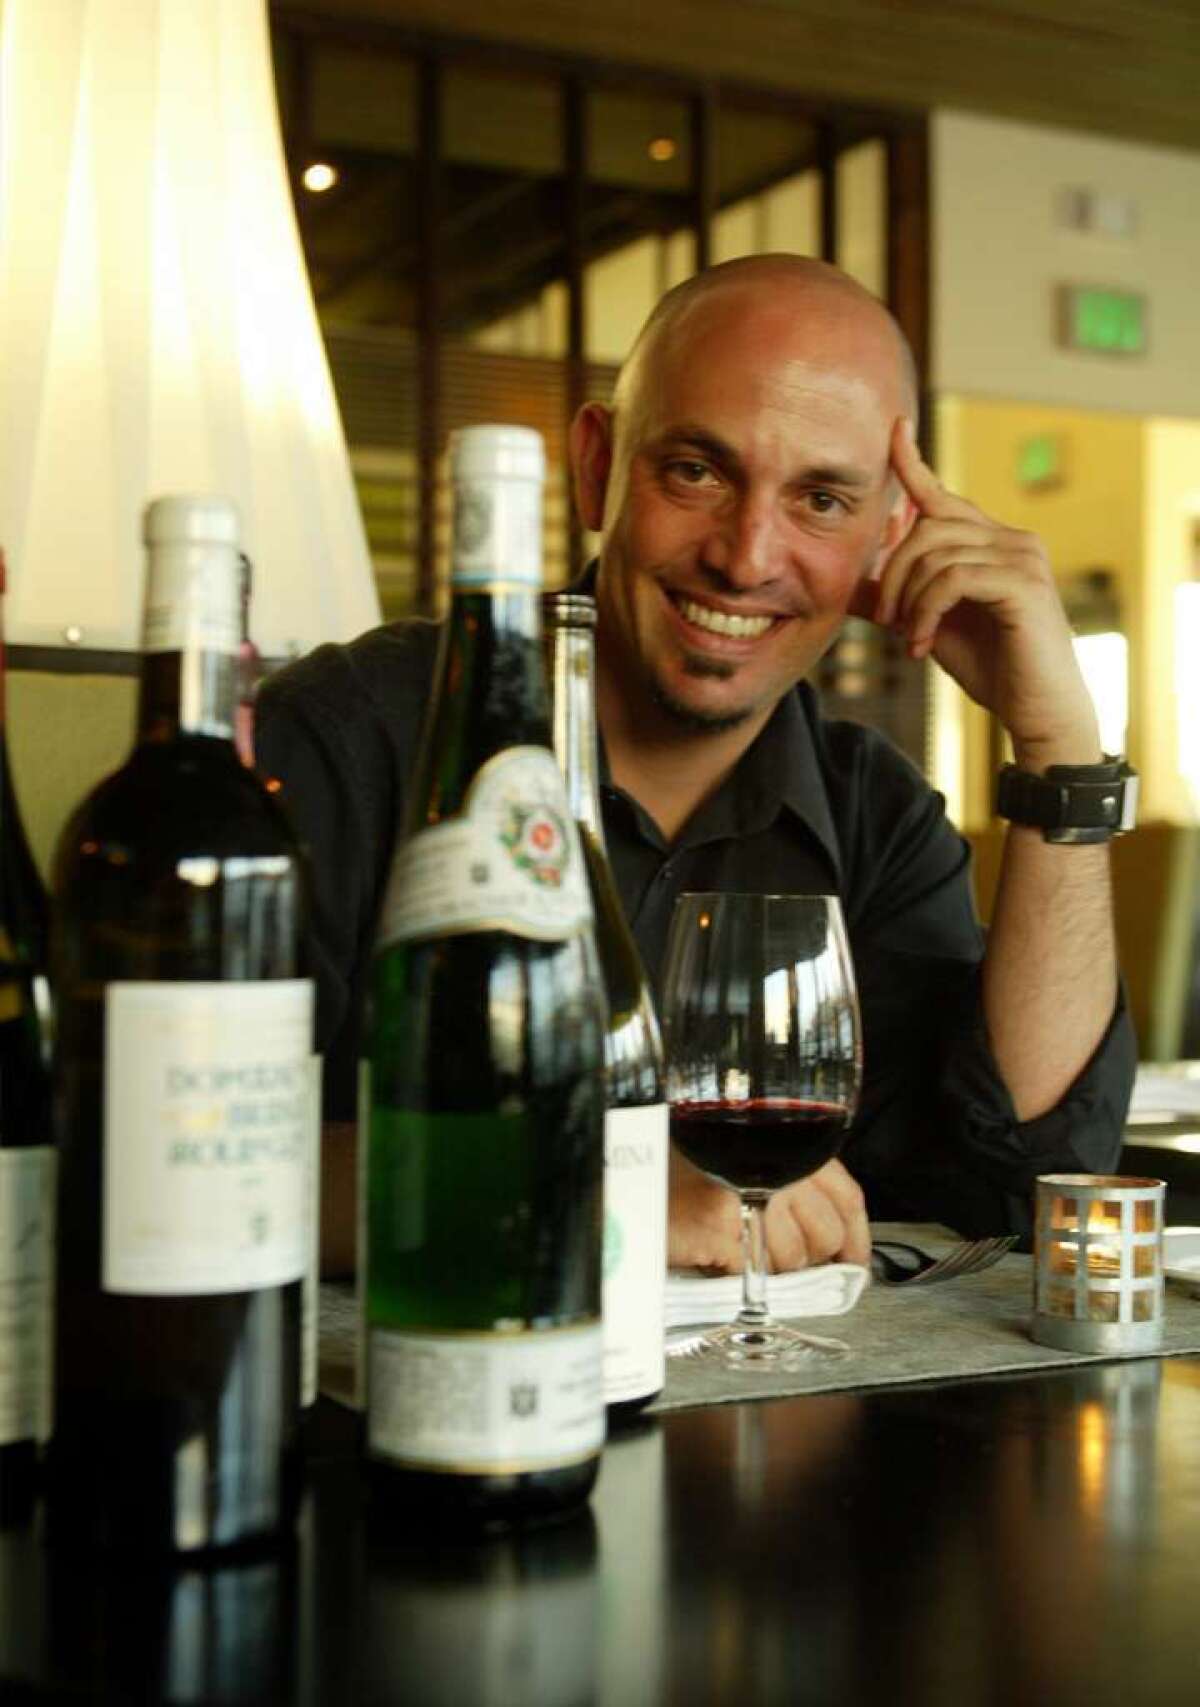 When it comes time to kick back, Osteria Mozza general manager goes for Chardonnay, specifically Mâcon Solutre Pouilly from Domaine de la Chapelle (imported by Peter Weygendt).